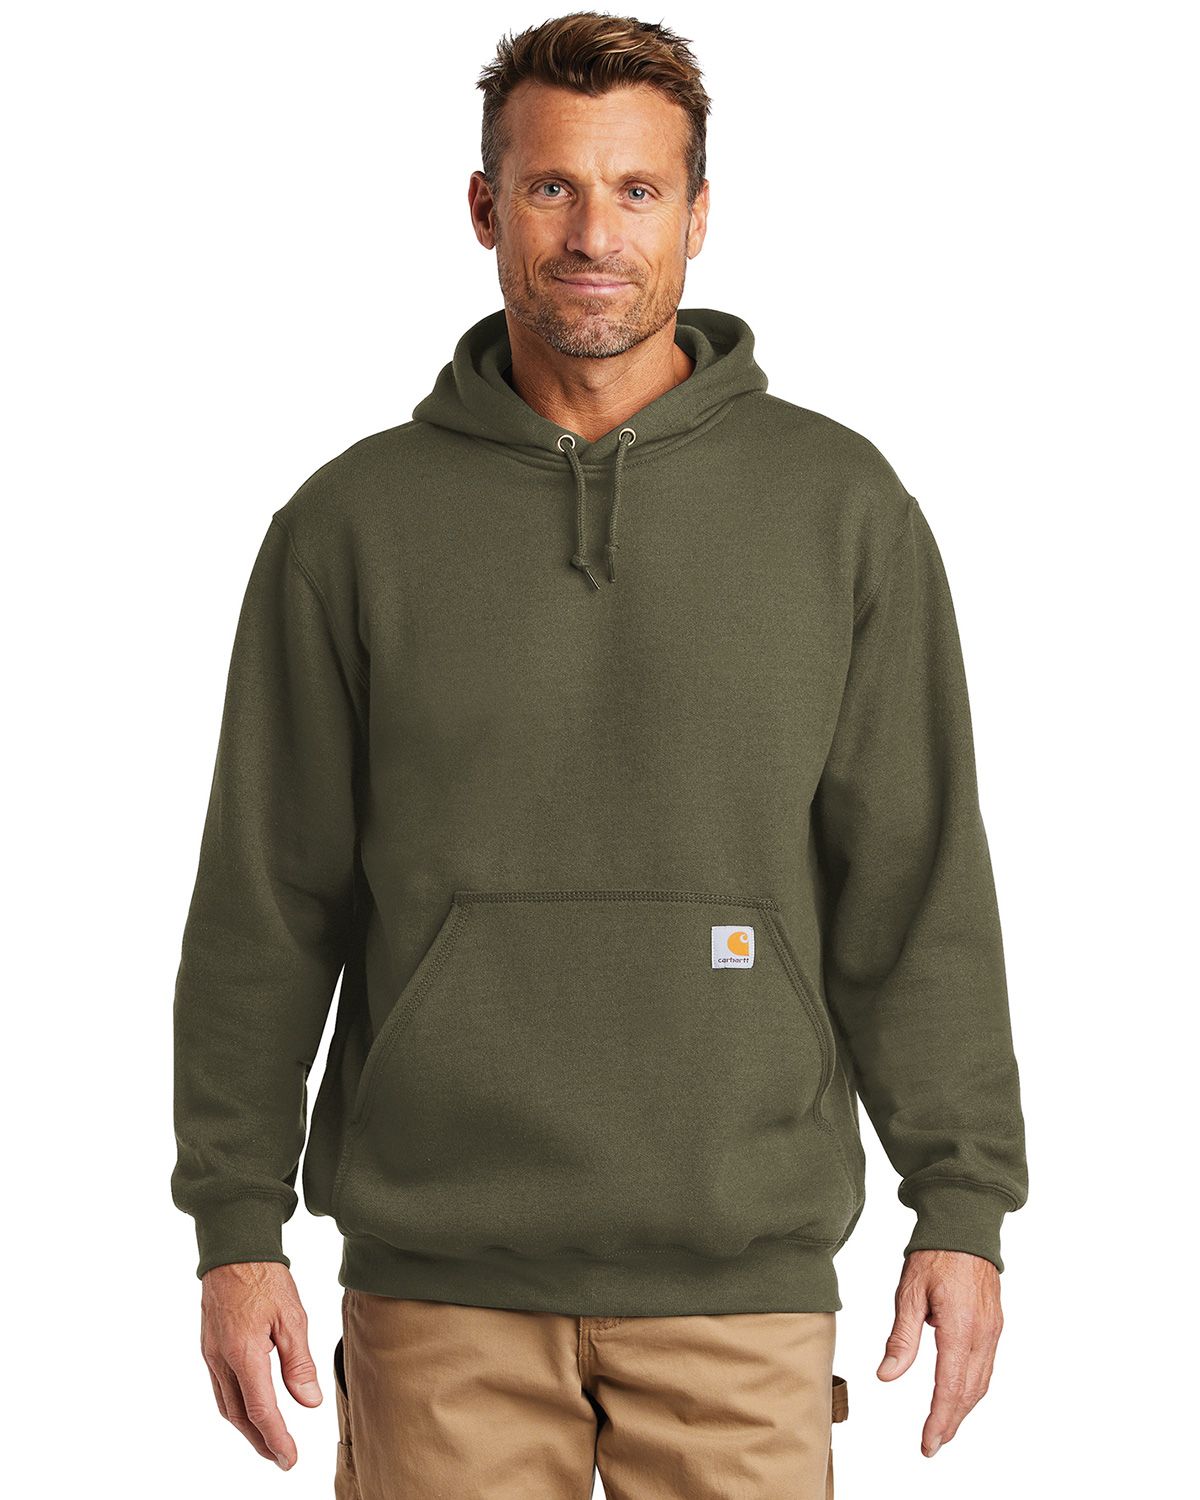 Carhartt CTK121 Midweight Hooded Sweatshirt - Free Shipping Available